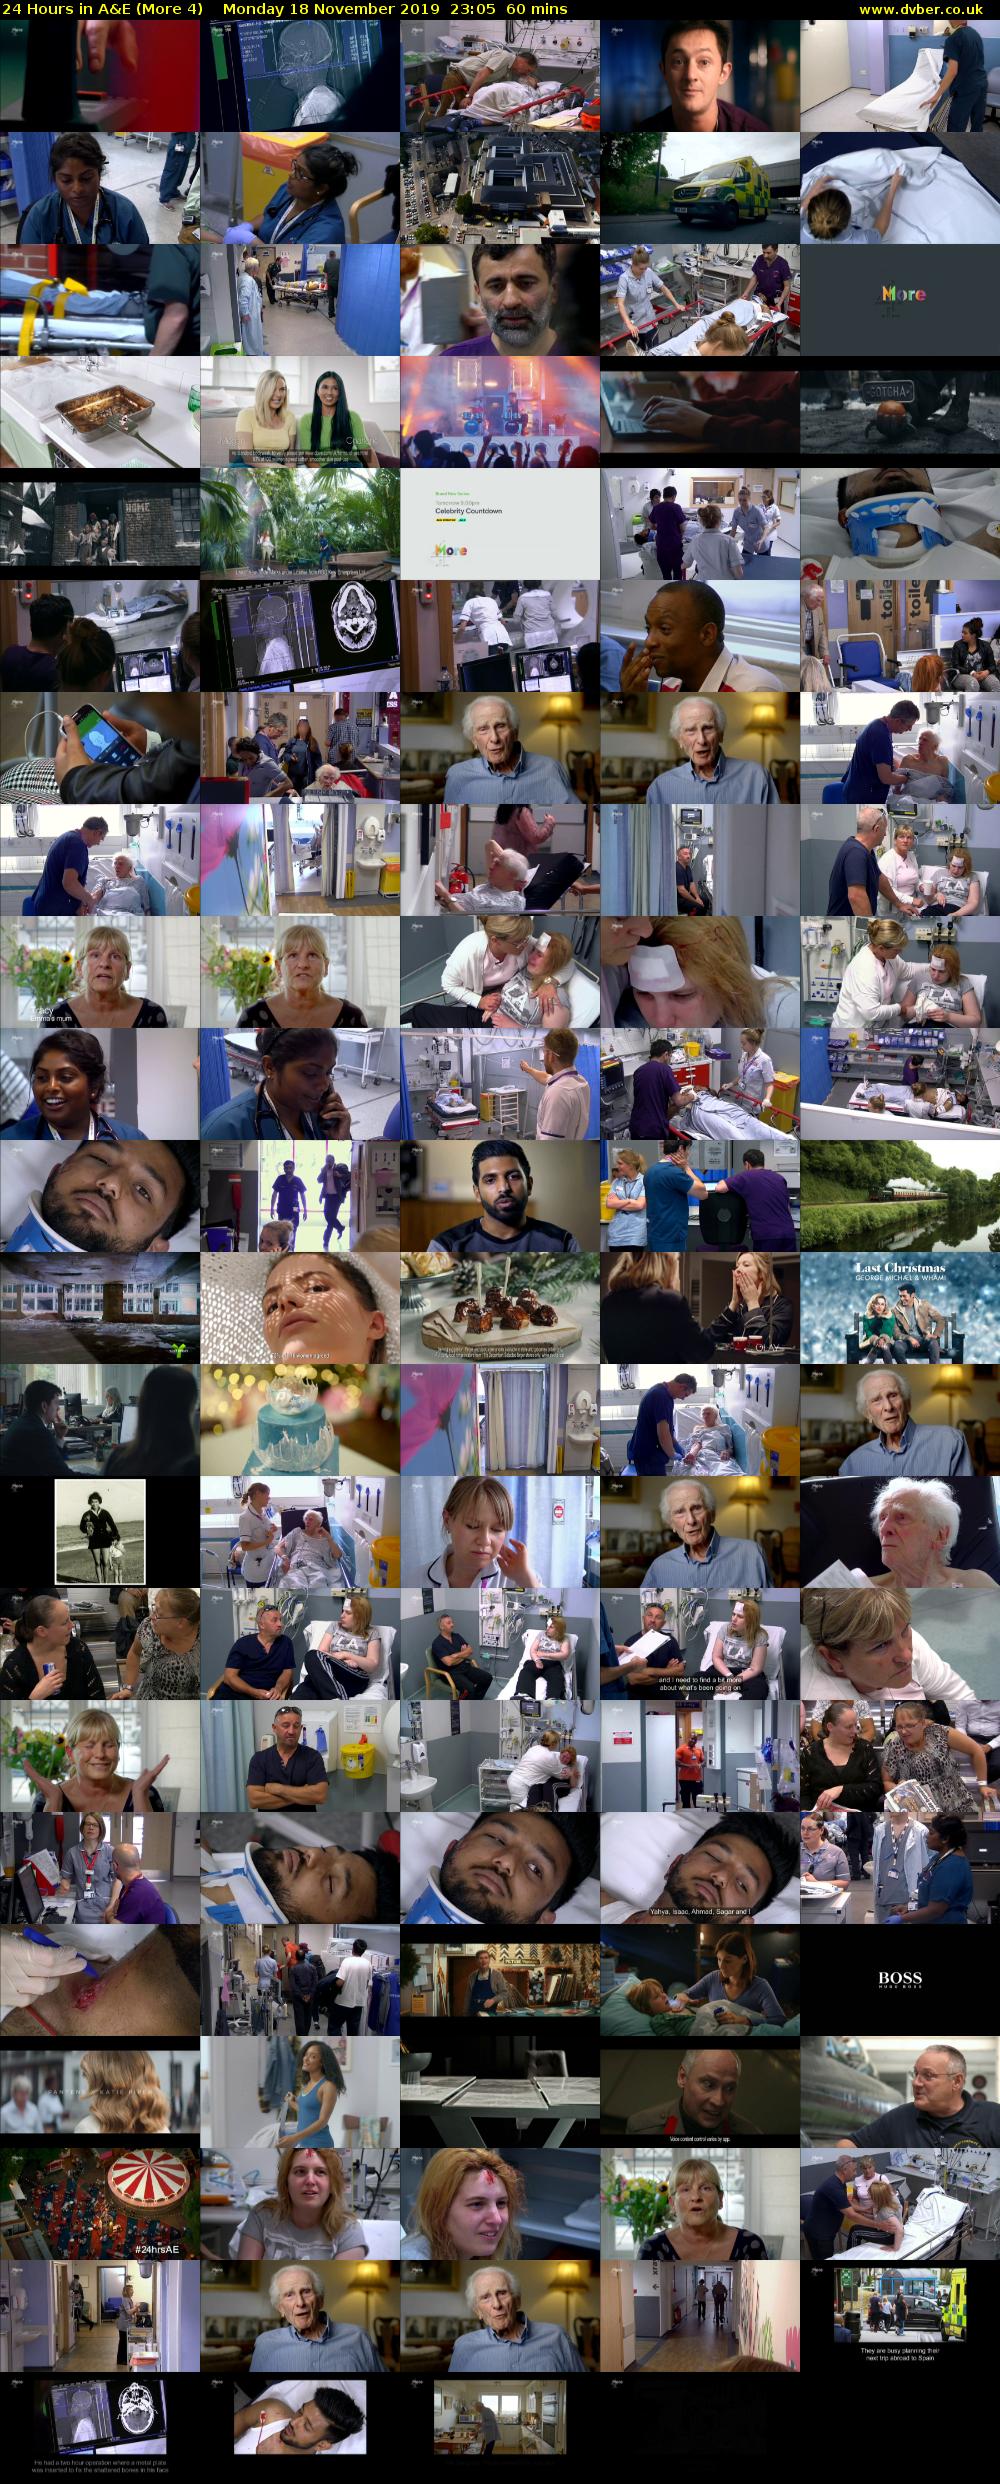 24 Hours in A&E (More 4) Monday 18 November 2019 23:05 - 00:05